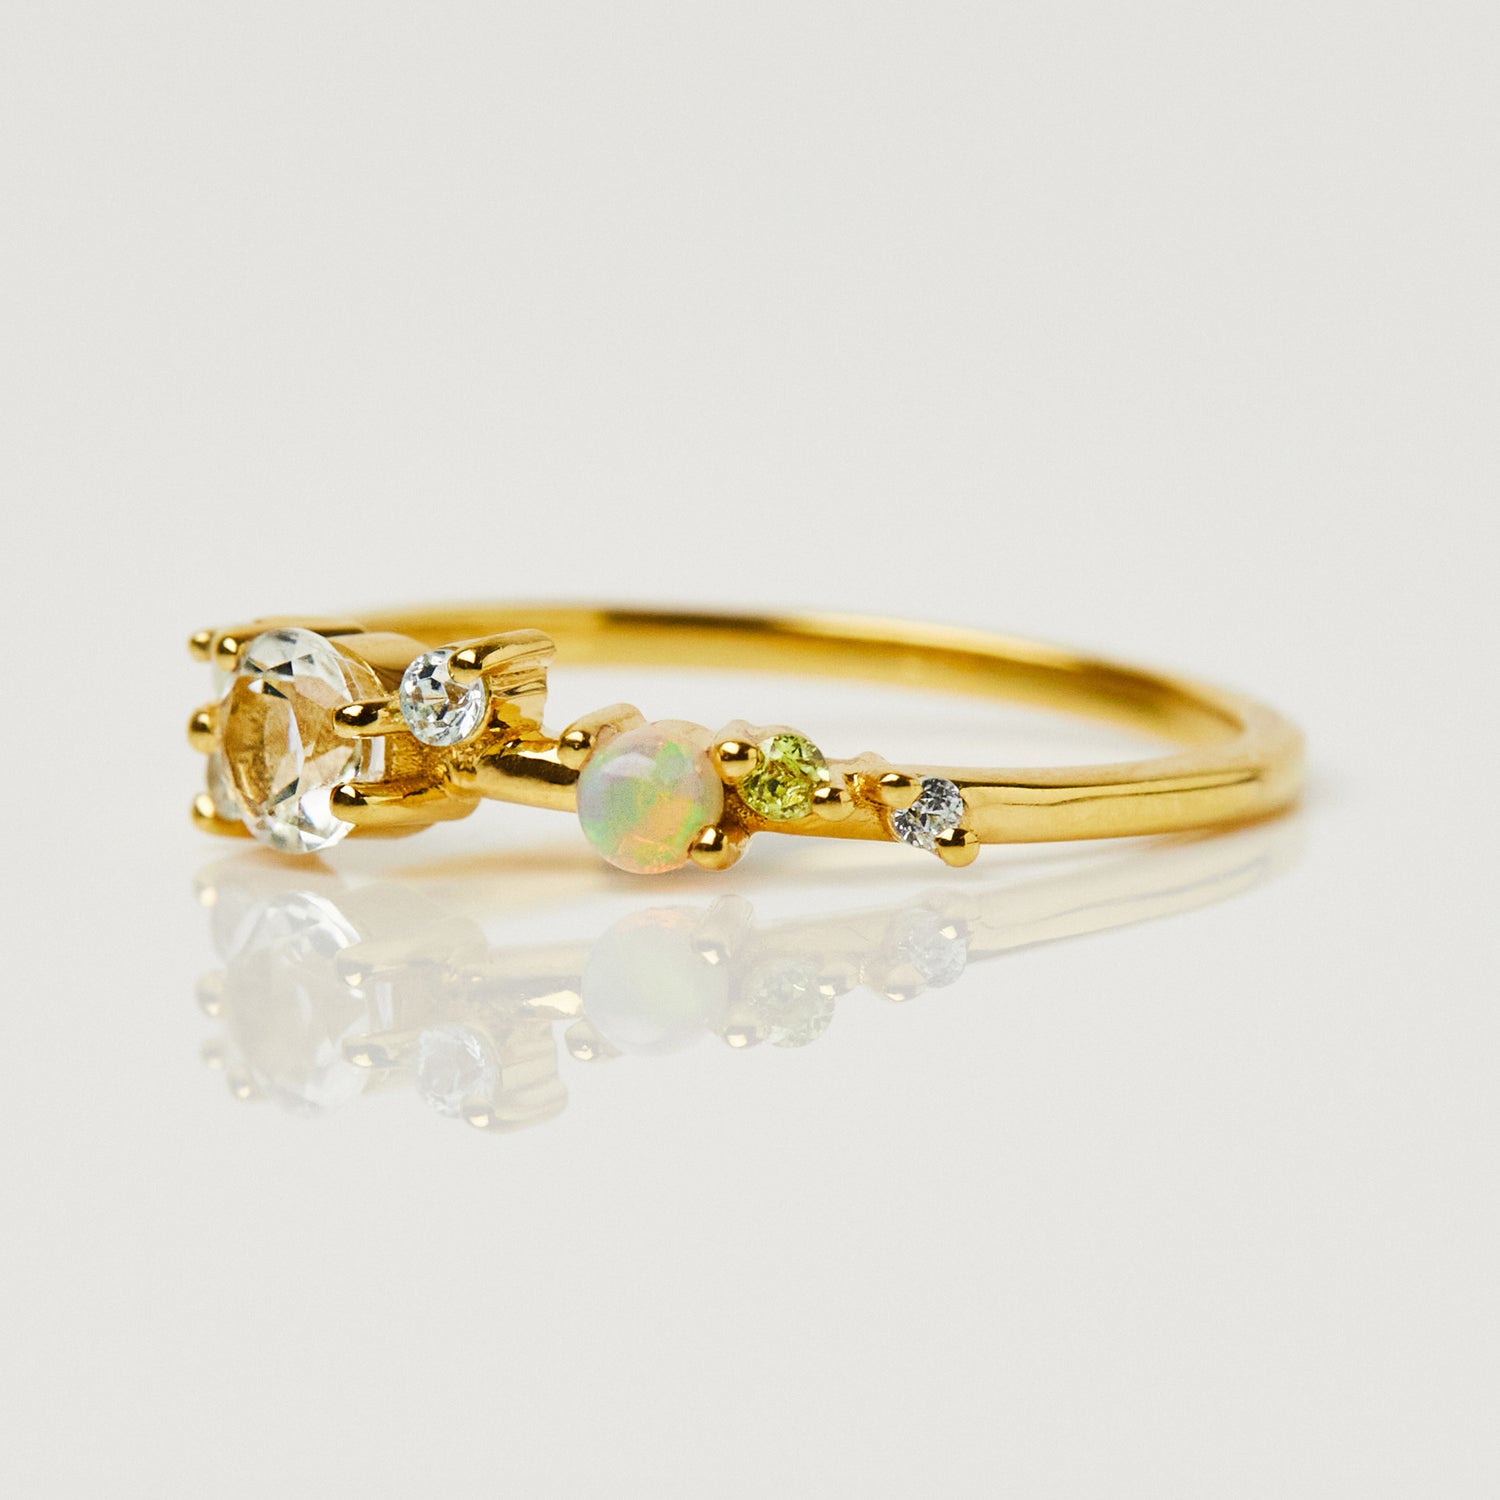 Carrie elizabeth delicate eclectic ring in gold vermeil